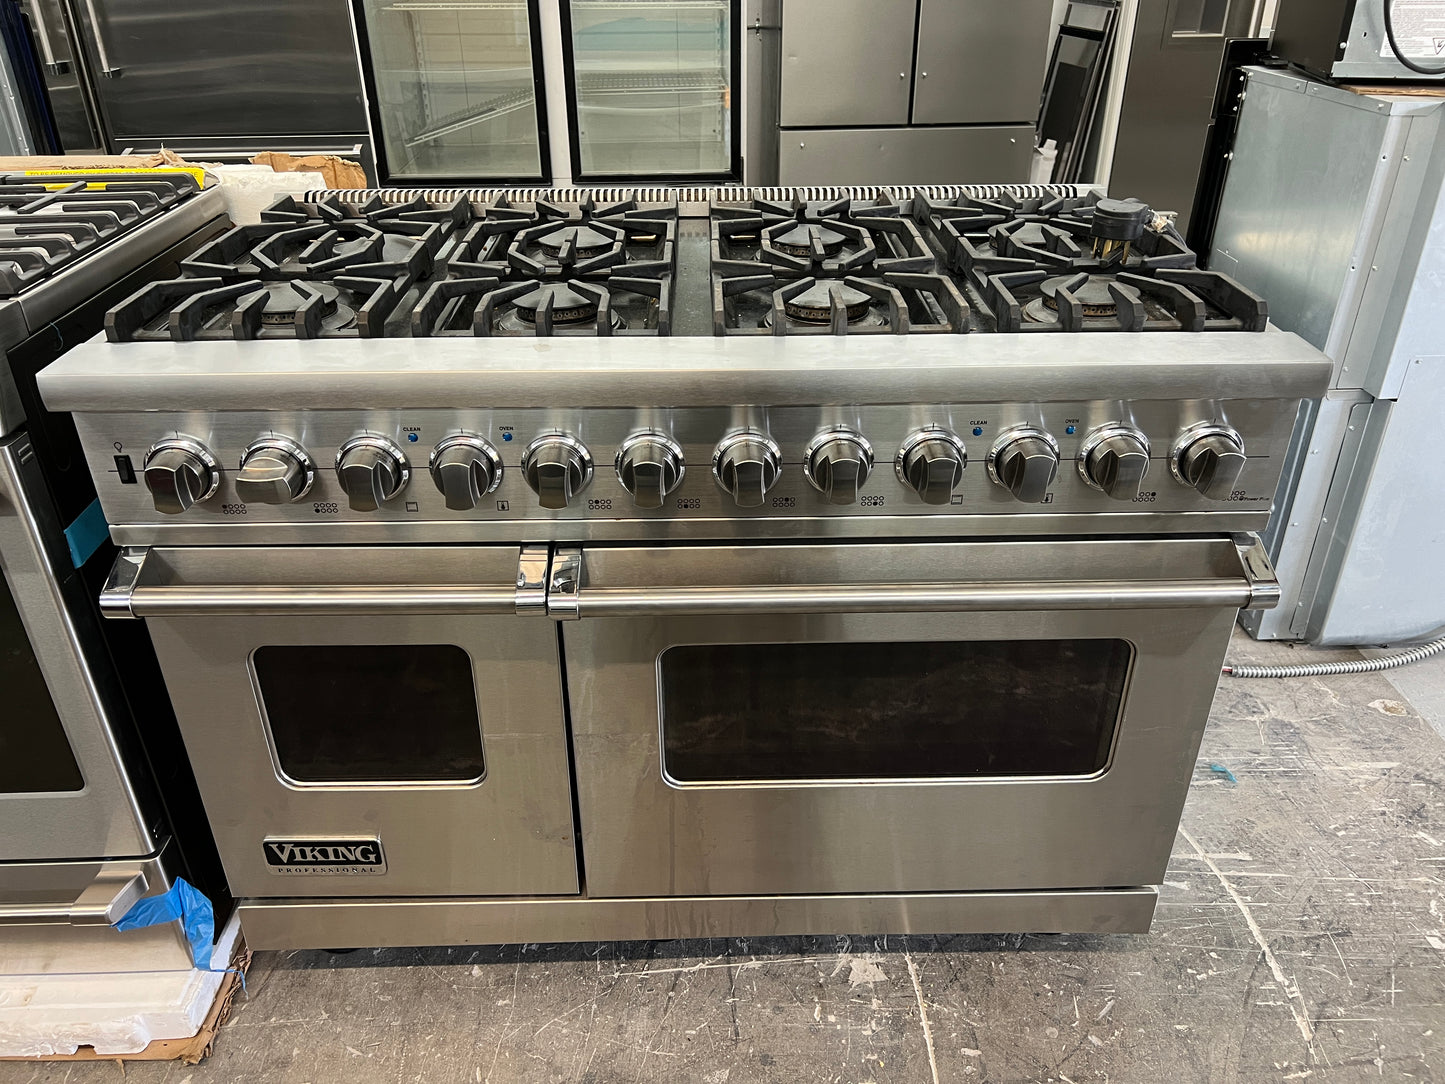 VDSC5488BSSLP 48 Inch Pro-Style Dual-Fuel Range with 8 VSH Pro Sealed Burners, VariSimmers, Vari-Speed Dual Flow Convection Ovens, Self-Clean, Bread Proofing and Rapid Ready Preheat: Stainless Steel, Liquid Propane , 369416